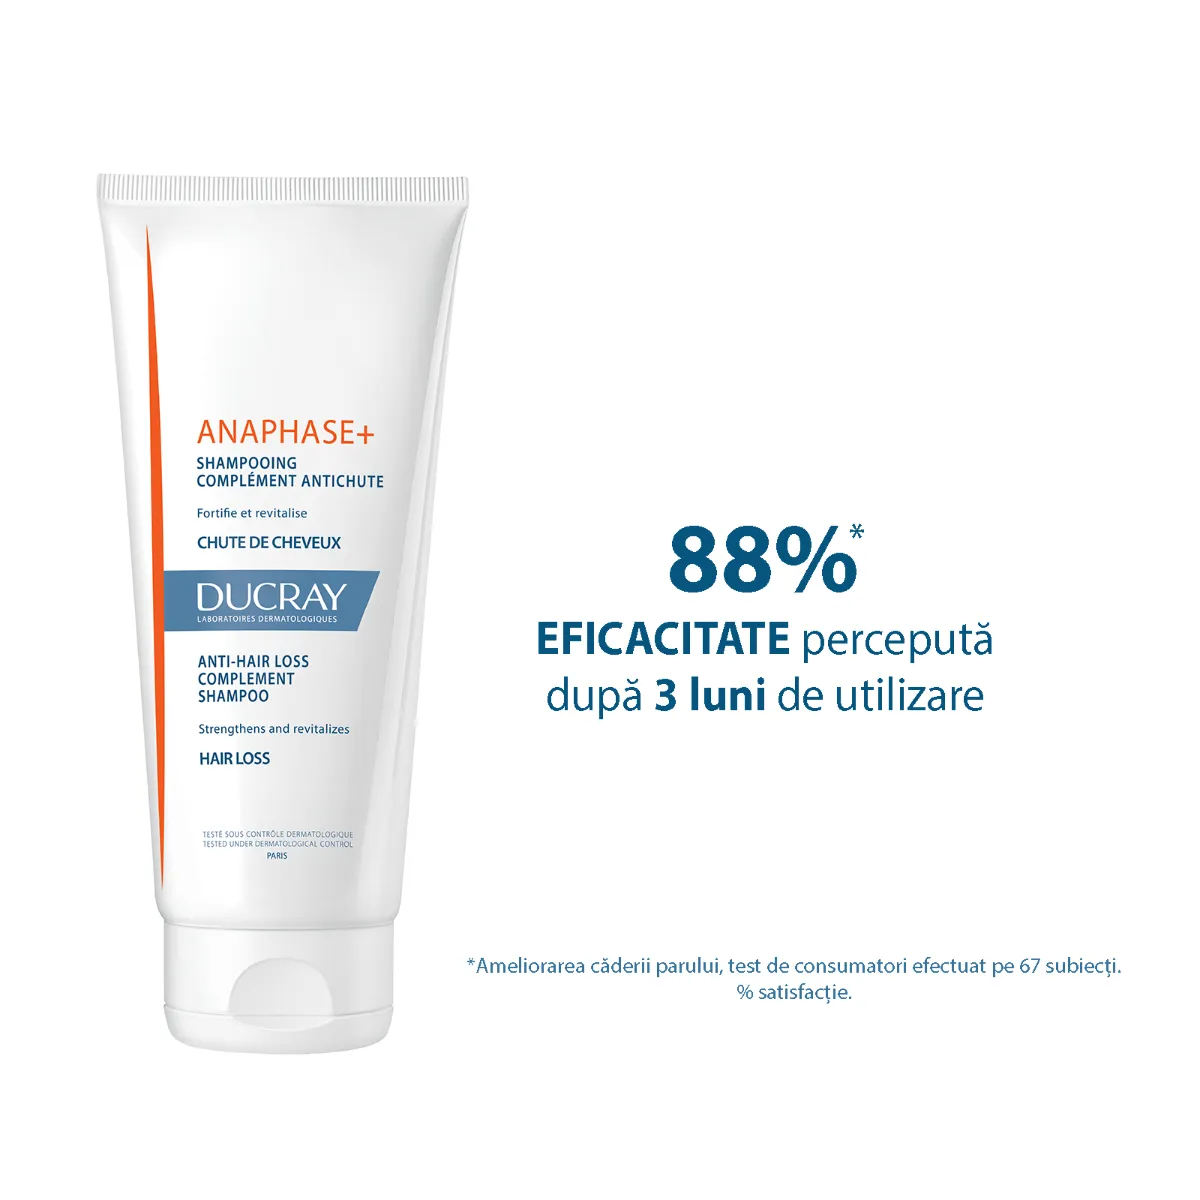 Sampon fortifiant si revitalizant Anaphase+, 200ml, Ducray 